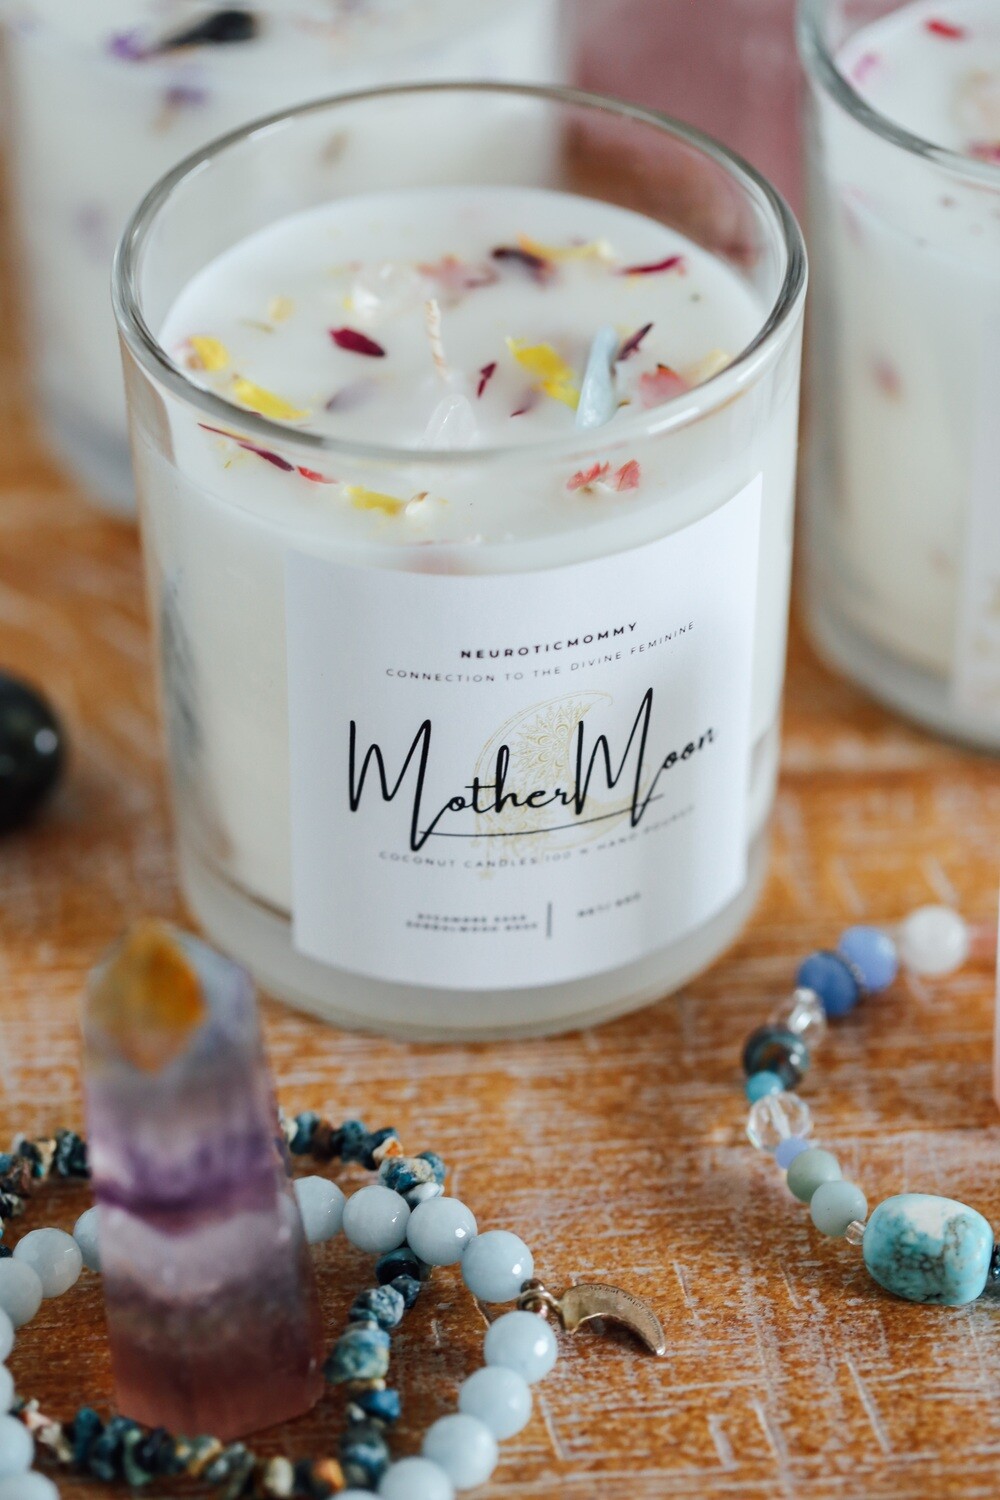 Mother Moon - Divine Feminine Candle